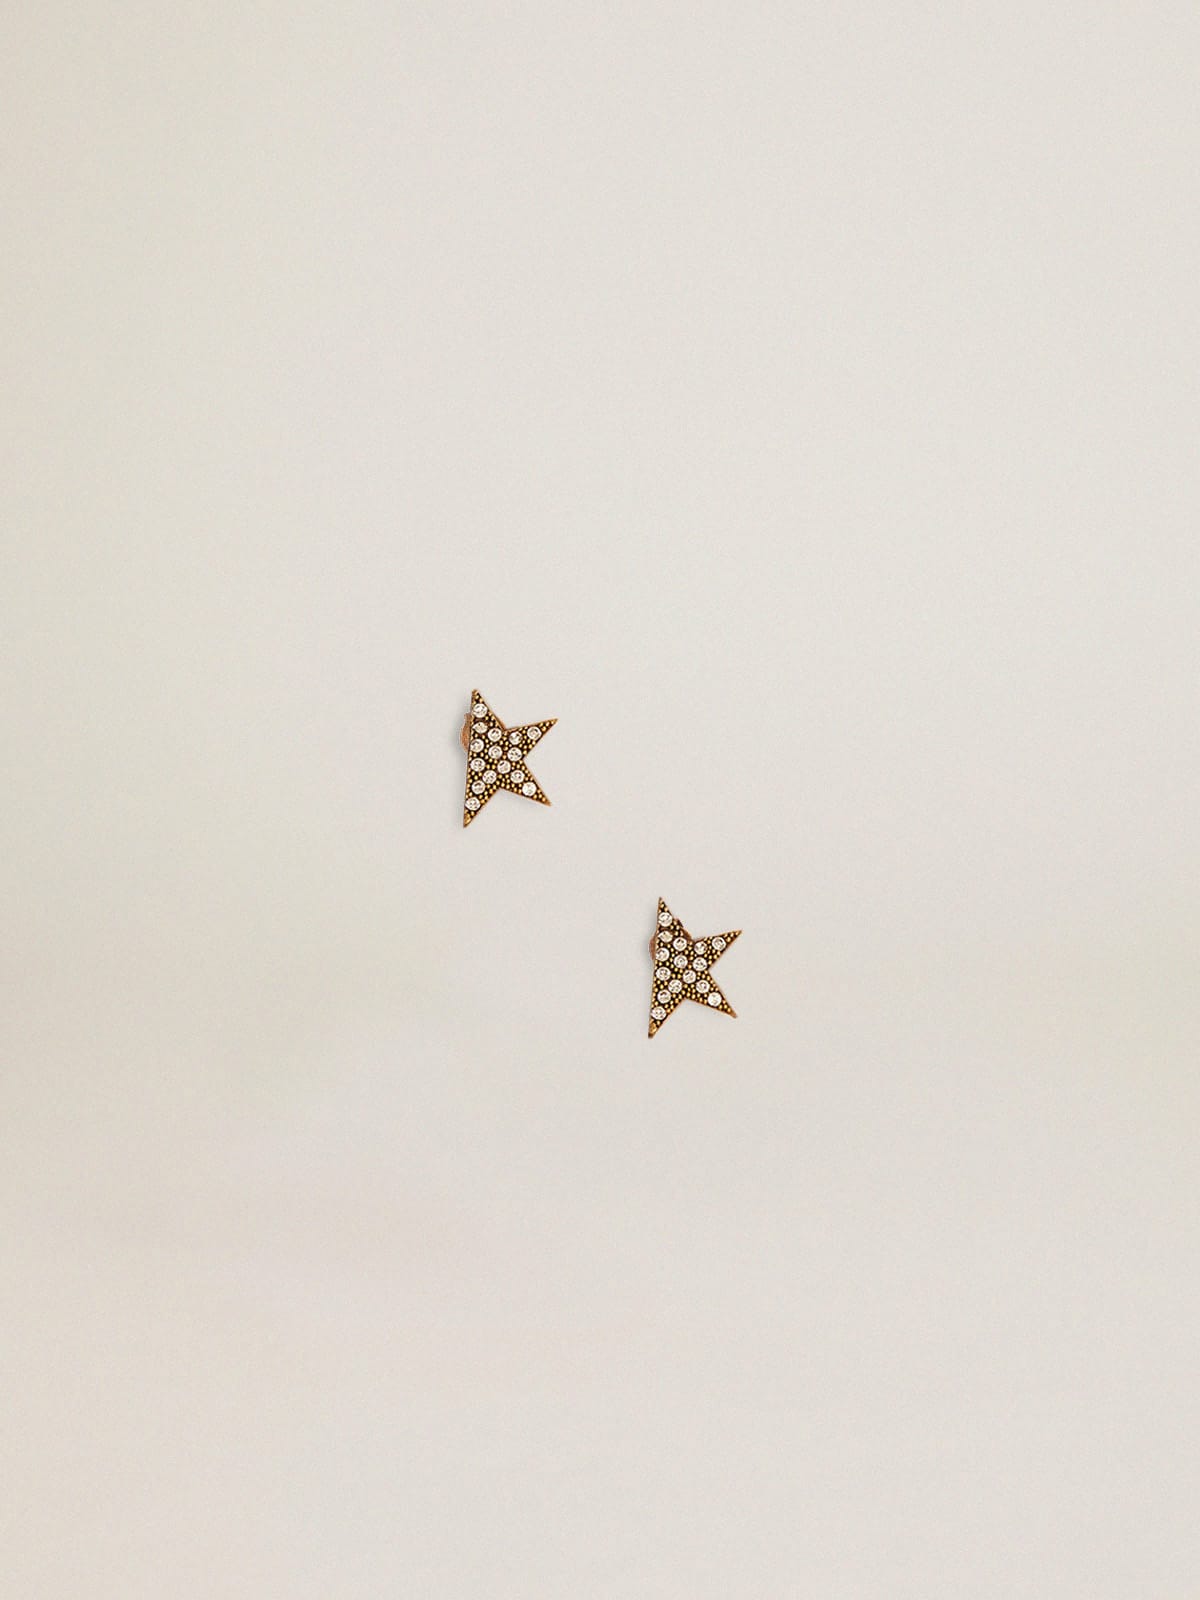 Golden Goose - Women's stud earrings in old gold color with crystals in 